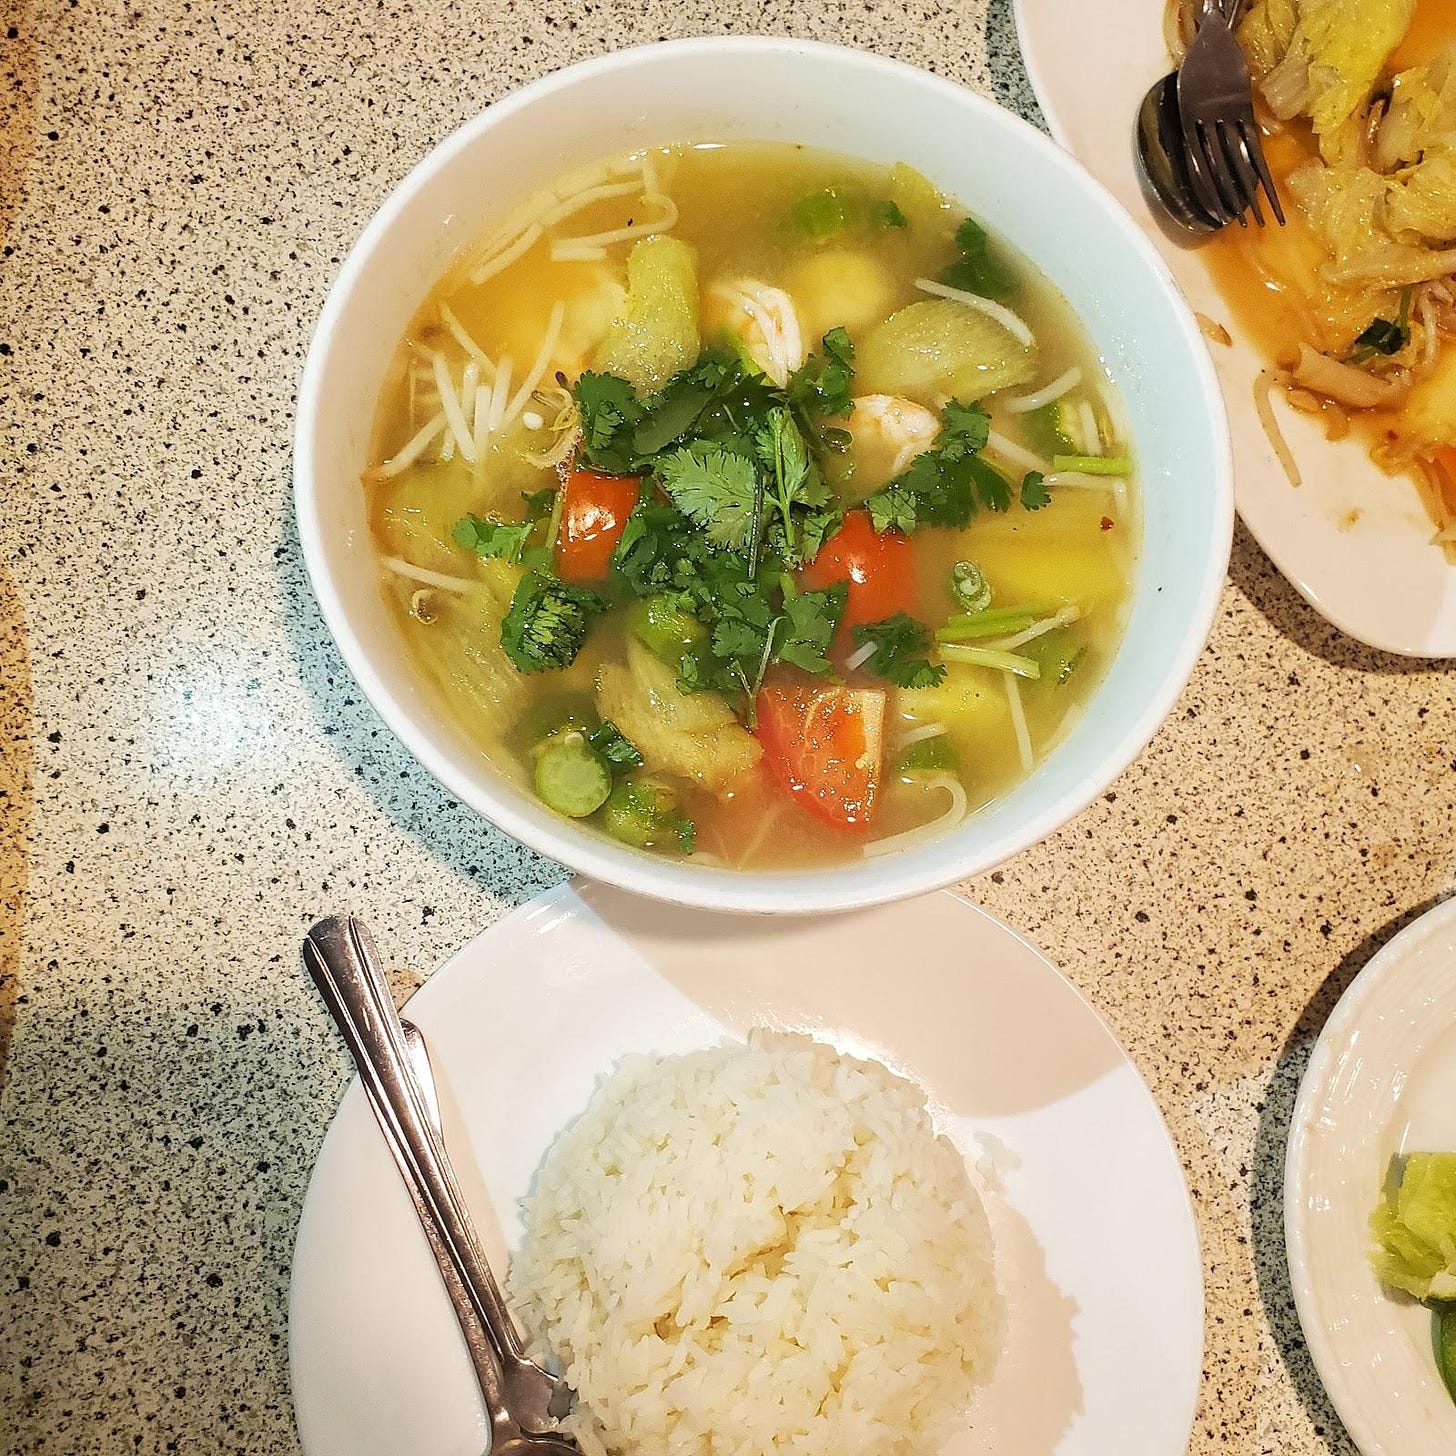 A bowl of soup with rice and vegetables

Description automatically generated with low confidence